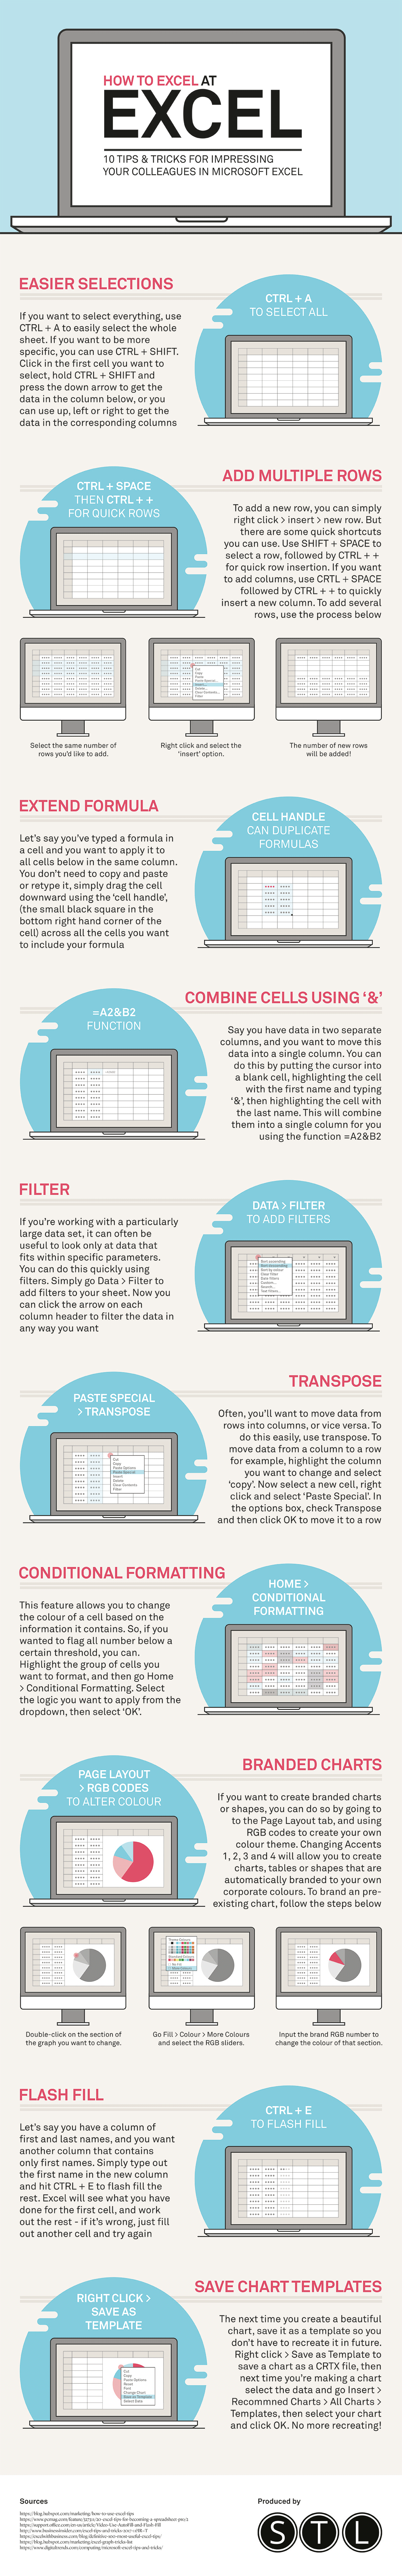 Excel at Excel infographic